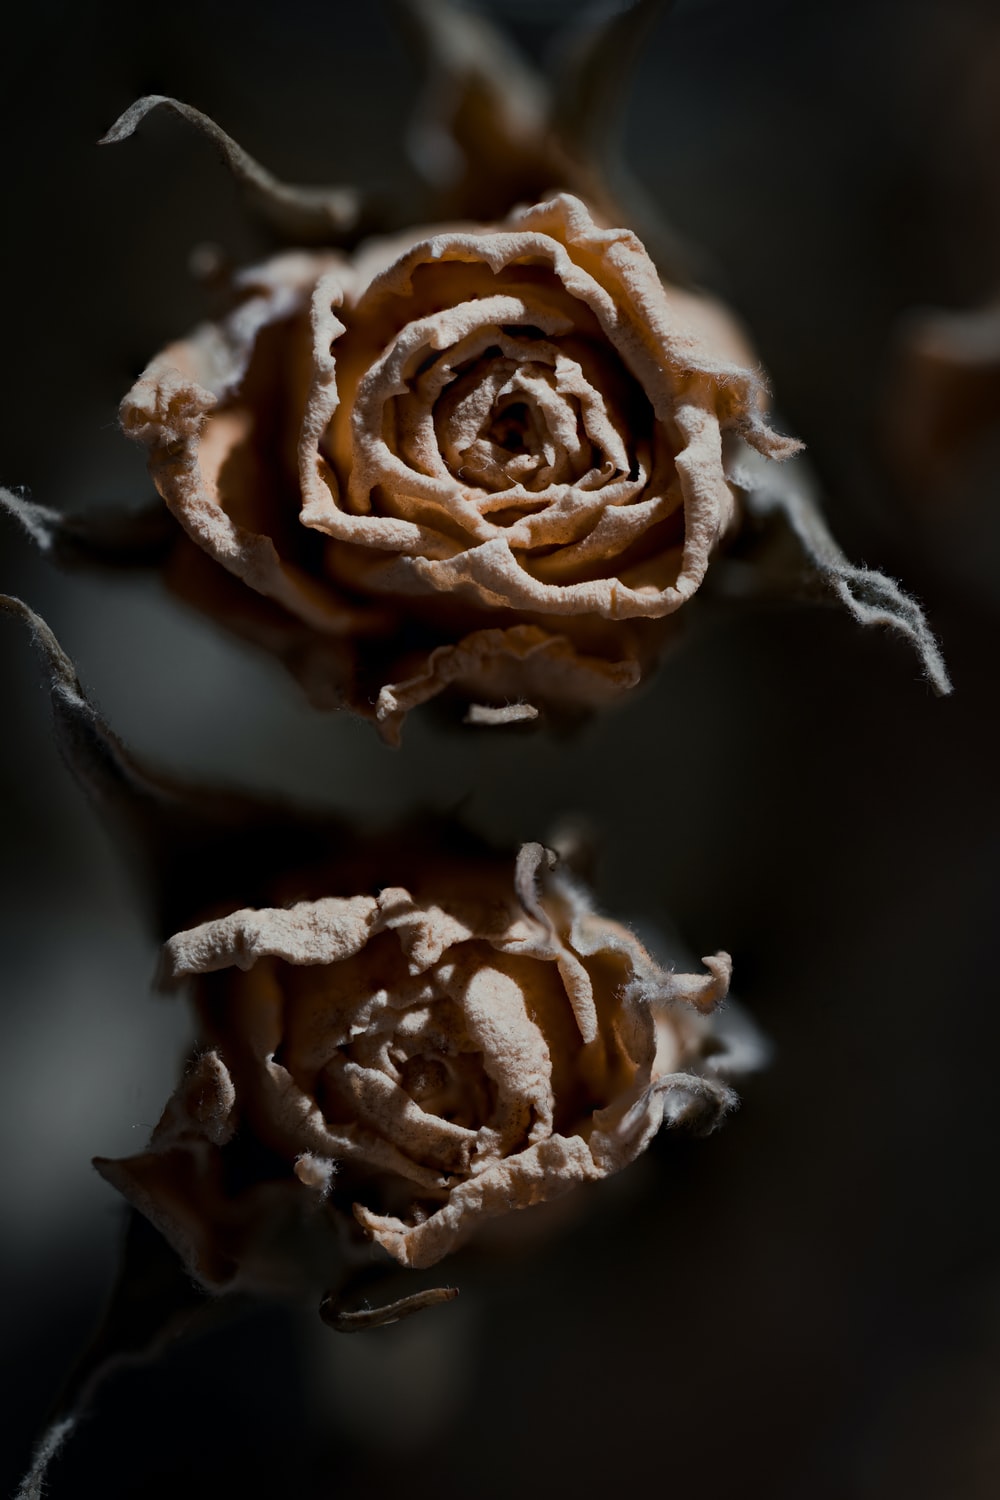 Dead Rose Picture. Download Free Image